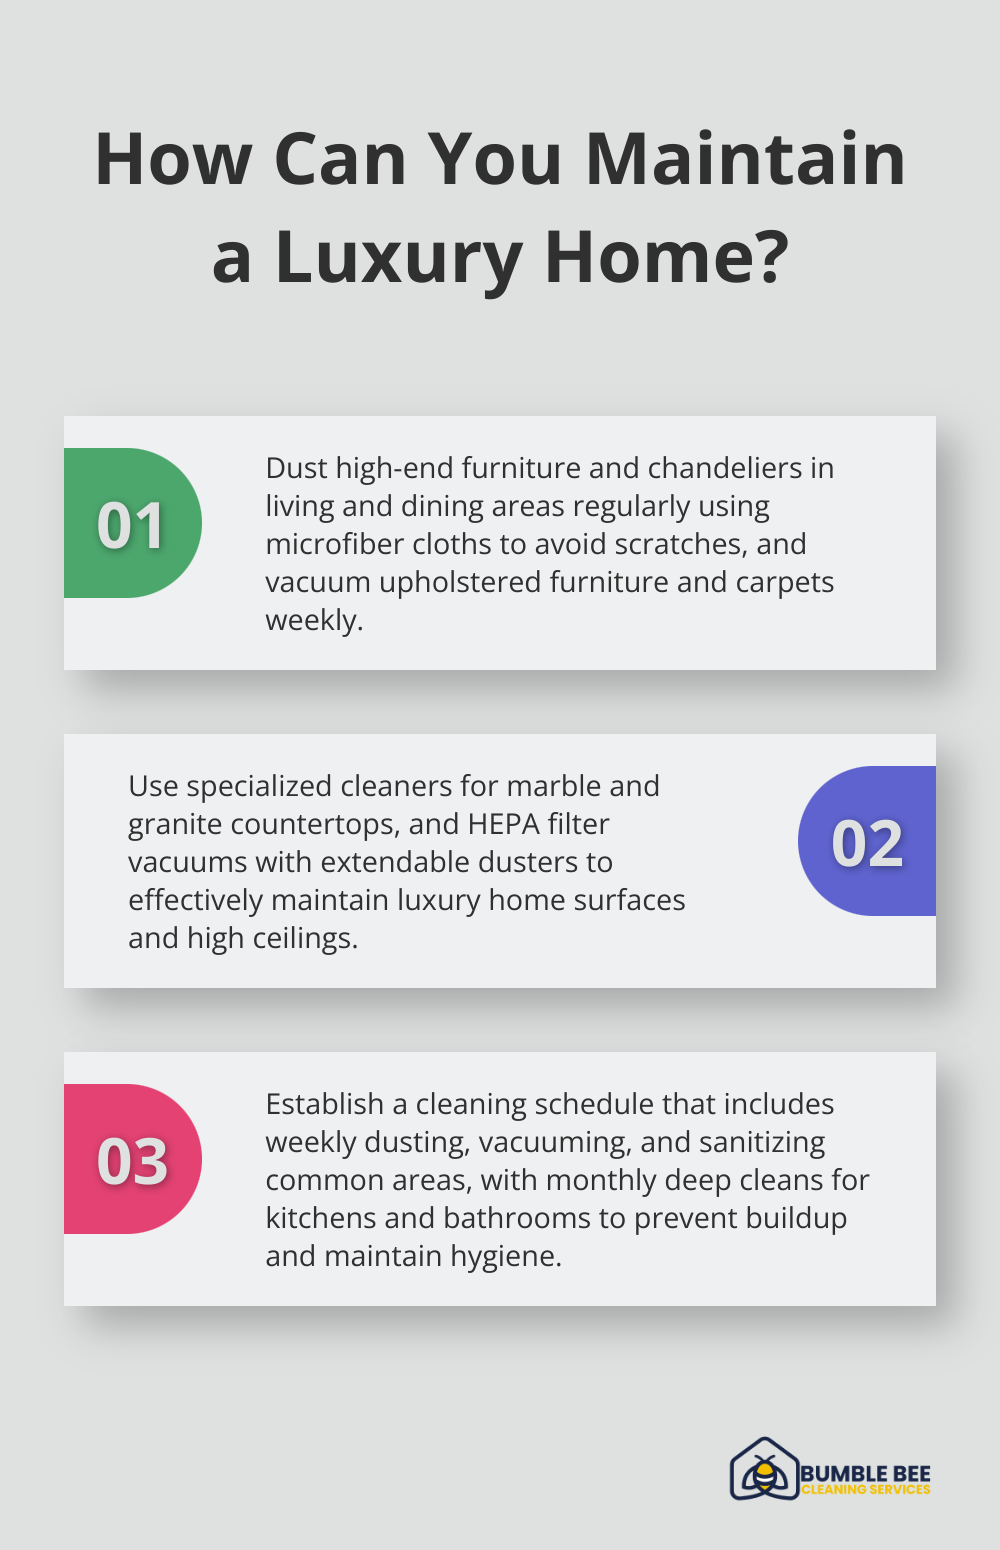 Fact - How Can You Maintain a Luxury Home?